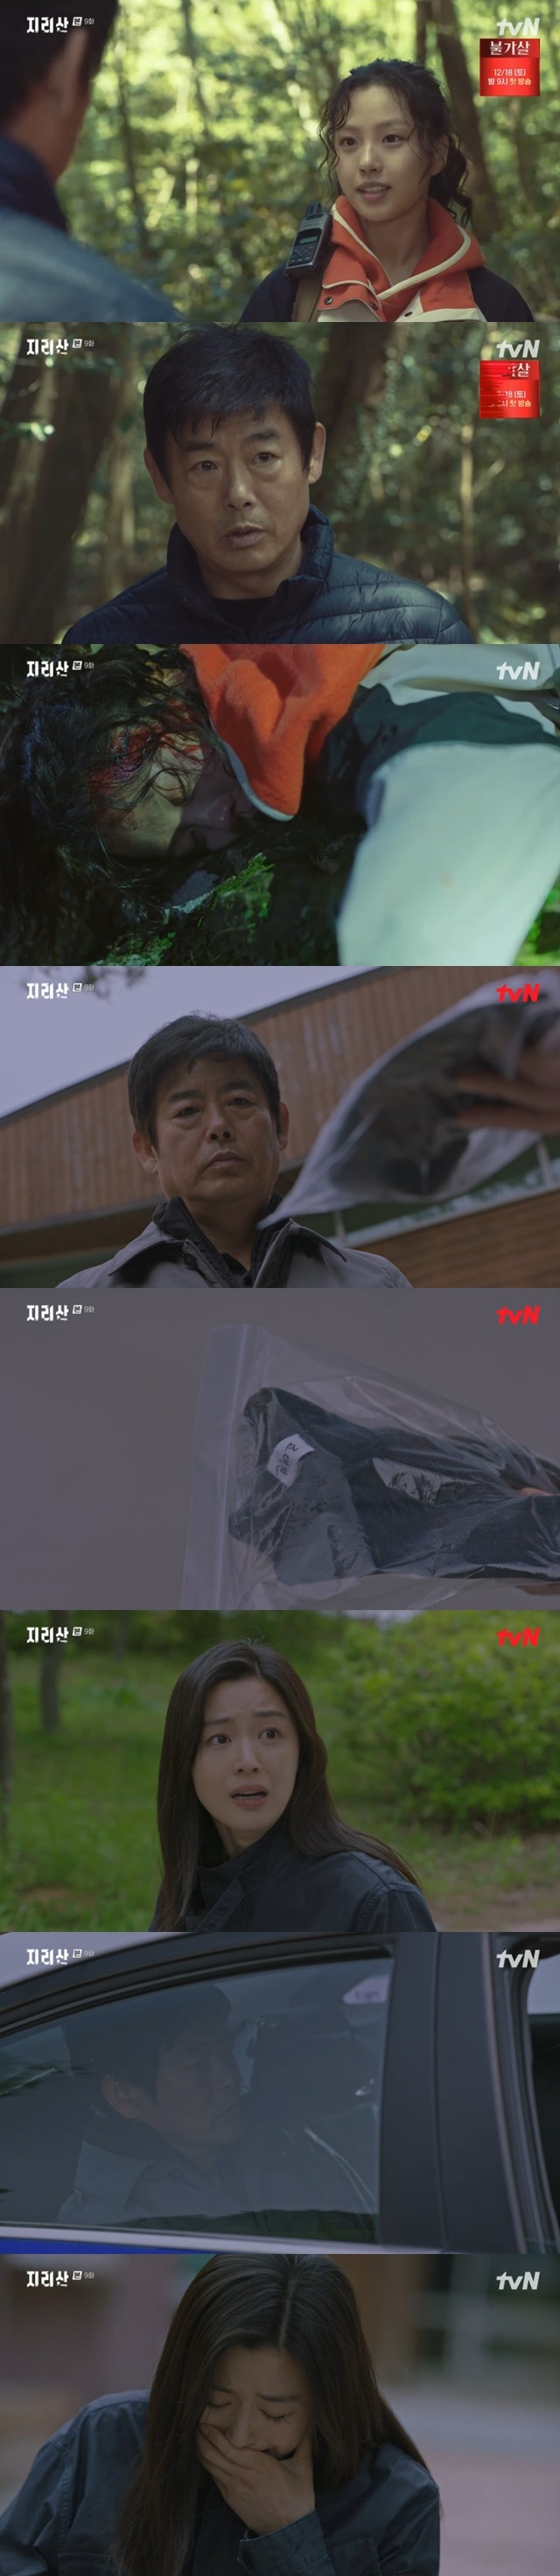 Jun Ji-hyun was The Scream, suspecting Sung Dong-il as the culprit who hurt Go Min-si and Ju Ji-hoon.In the 9th episode of TVNs Saturday Drama Jirisan (played by Kim Eun-hee/directed by Lee Eung-bok Park So-hyun), which was broadcast on November 20, Seo Ji-hyen suspected more of Cho Dae-jin (Sung Dong-il) in the death of idawon (Go Min-si).The Seoi River suspected Cho Dae-jin when a yellow ribbon that made him lose his way from the mountain that gang hyun (Ju Ji-hoon) said came out of Chos drawer.Then, the Seoi River asked the junior idawon for help, leaving the sign promised by the gang hyun on the mountain, and the unmanned camera was put in front of it. The idawon climbed the mountain again on the off-duty day and was in crisis.Idawon lost contact while being chased by a gunman, and Seoigang began to search for idawon by asking for help from Jeong Gu-young (Oh Jeong-se) and Kim Woong-soon (Jeon Seok-ho).A bloody cell phone was found first, and a conversation with Cho Dae-jin was recorded in the cell phone.The identity of the stranger Idawon met in the mountains was actually Cho Dae-jin. Idawon pressed the recording button first without recognizing Cho Dae-jin.Cho suggested that he go down the mountain together because it was dangerous, but idawon refused, frightened. Soigang heard the recording and said, Why did the majority record this conversation?The pluralist voice was scared, he said, but Jeong Gu-young did not believe the suspicion of the Seo River, saying, Do you think the captain did something bad to the pluralist? But then, idawon was found dead, and suspicions toward Cho Dae-jin deepened, as idawon, who is believed to have been killed in the crash, held Chos gloves.Seoigang said, Did you really do that? Did you make it like that? Why did you do that? Did you make other people like that?Did you make Hyunjo like that? Cho Dae-jin left for a police investigation without saying anything, and Seo-gang was sorry for the death of idawon while listening to his request.The spirit gang hyun sent a message to the Seo River saying, I did not leave the mark this time.Someone imitated the dang hyunjo to manipulate the marker to find idawon. The seoi River also captured the fact that idawons notebook was gone.The Seoi River fell down in a wheelchair, saying, If it is not Hyunjo, why did someone leave a mark? And said, I have to meet Hyunjo.If youre there, answer me. What you saw. What you know.